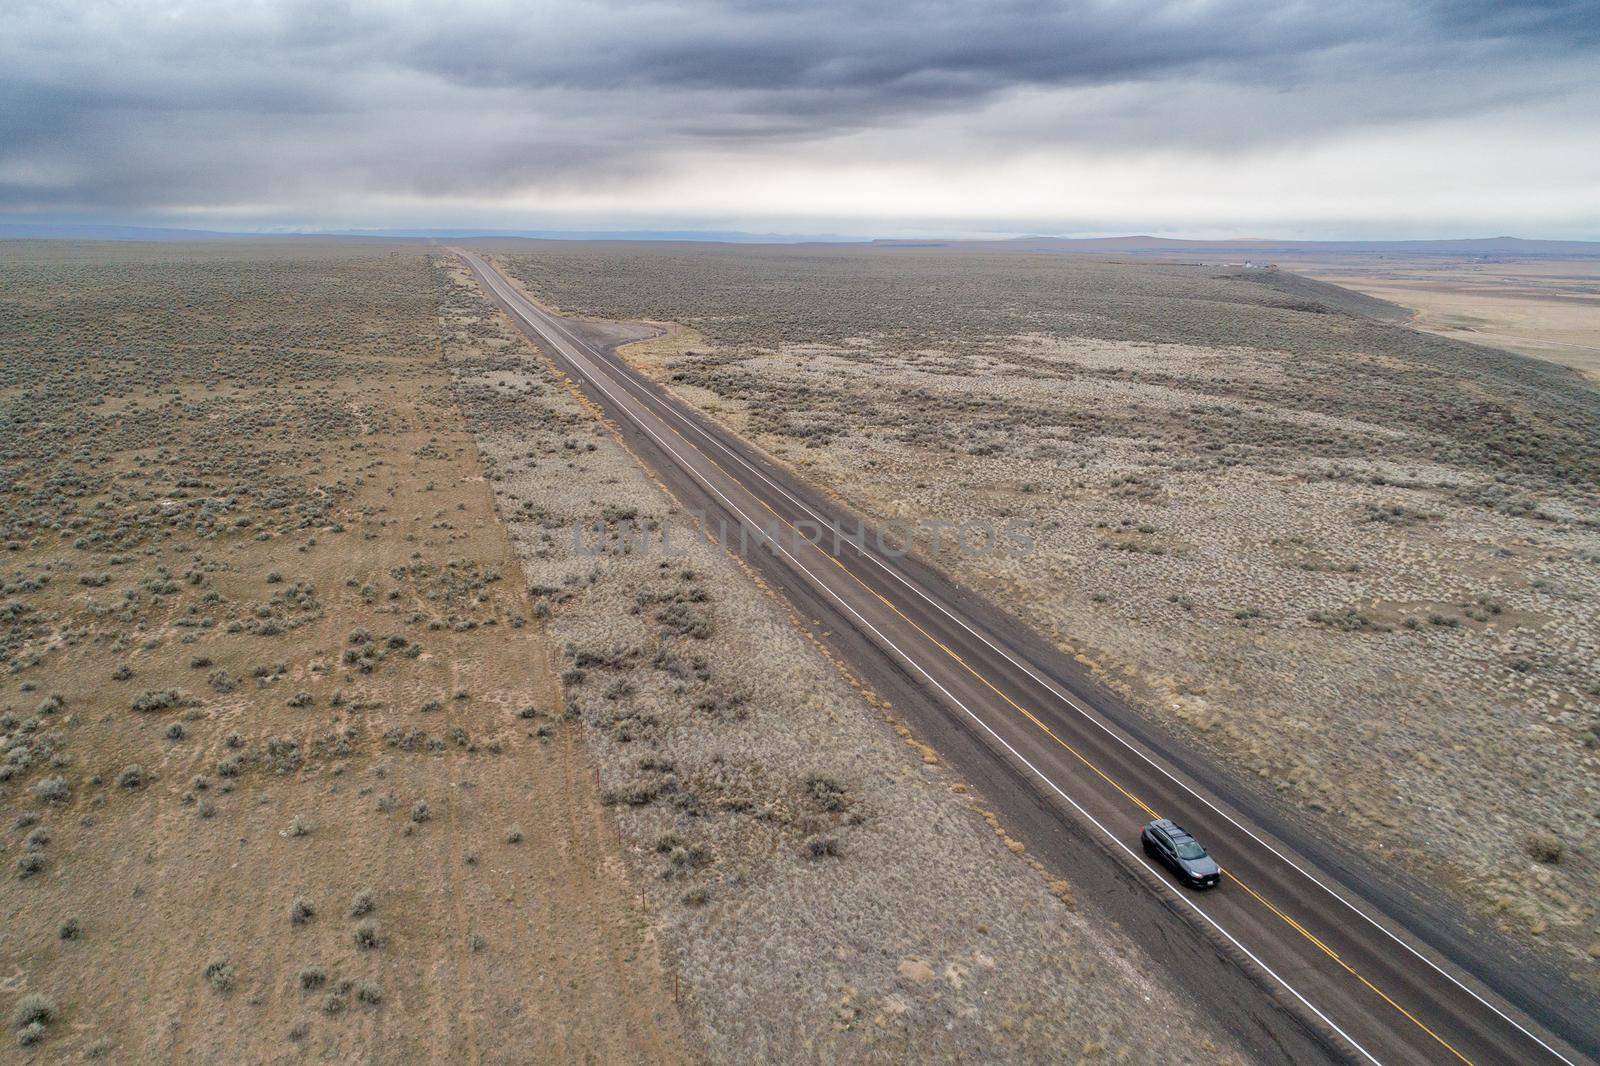 Aerial view of a car driving through a deserted area in the middle of nowhere